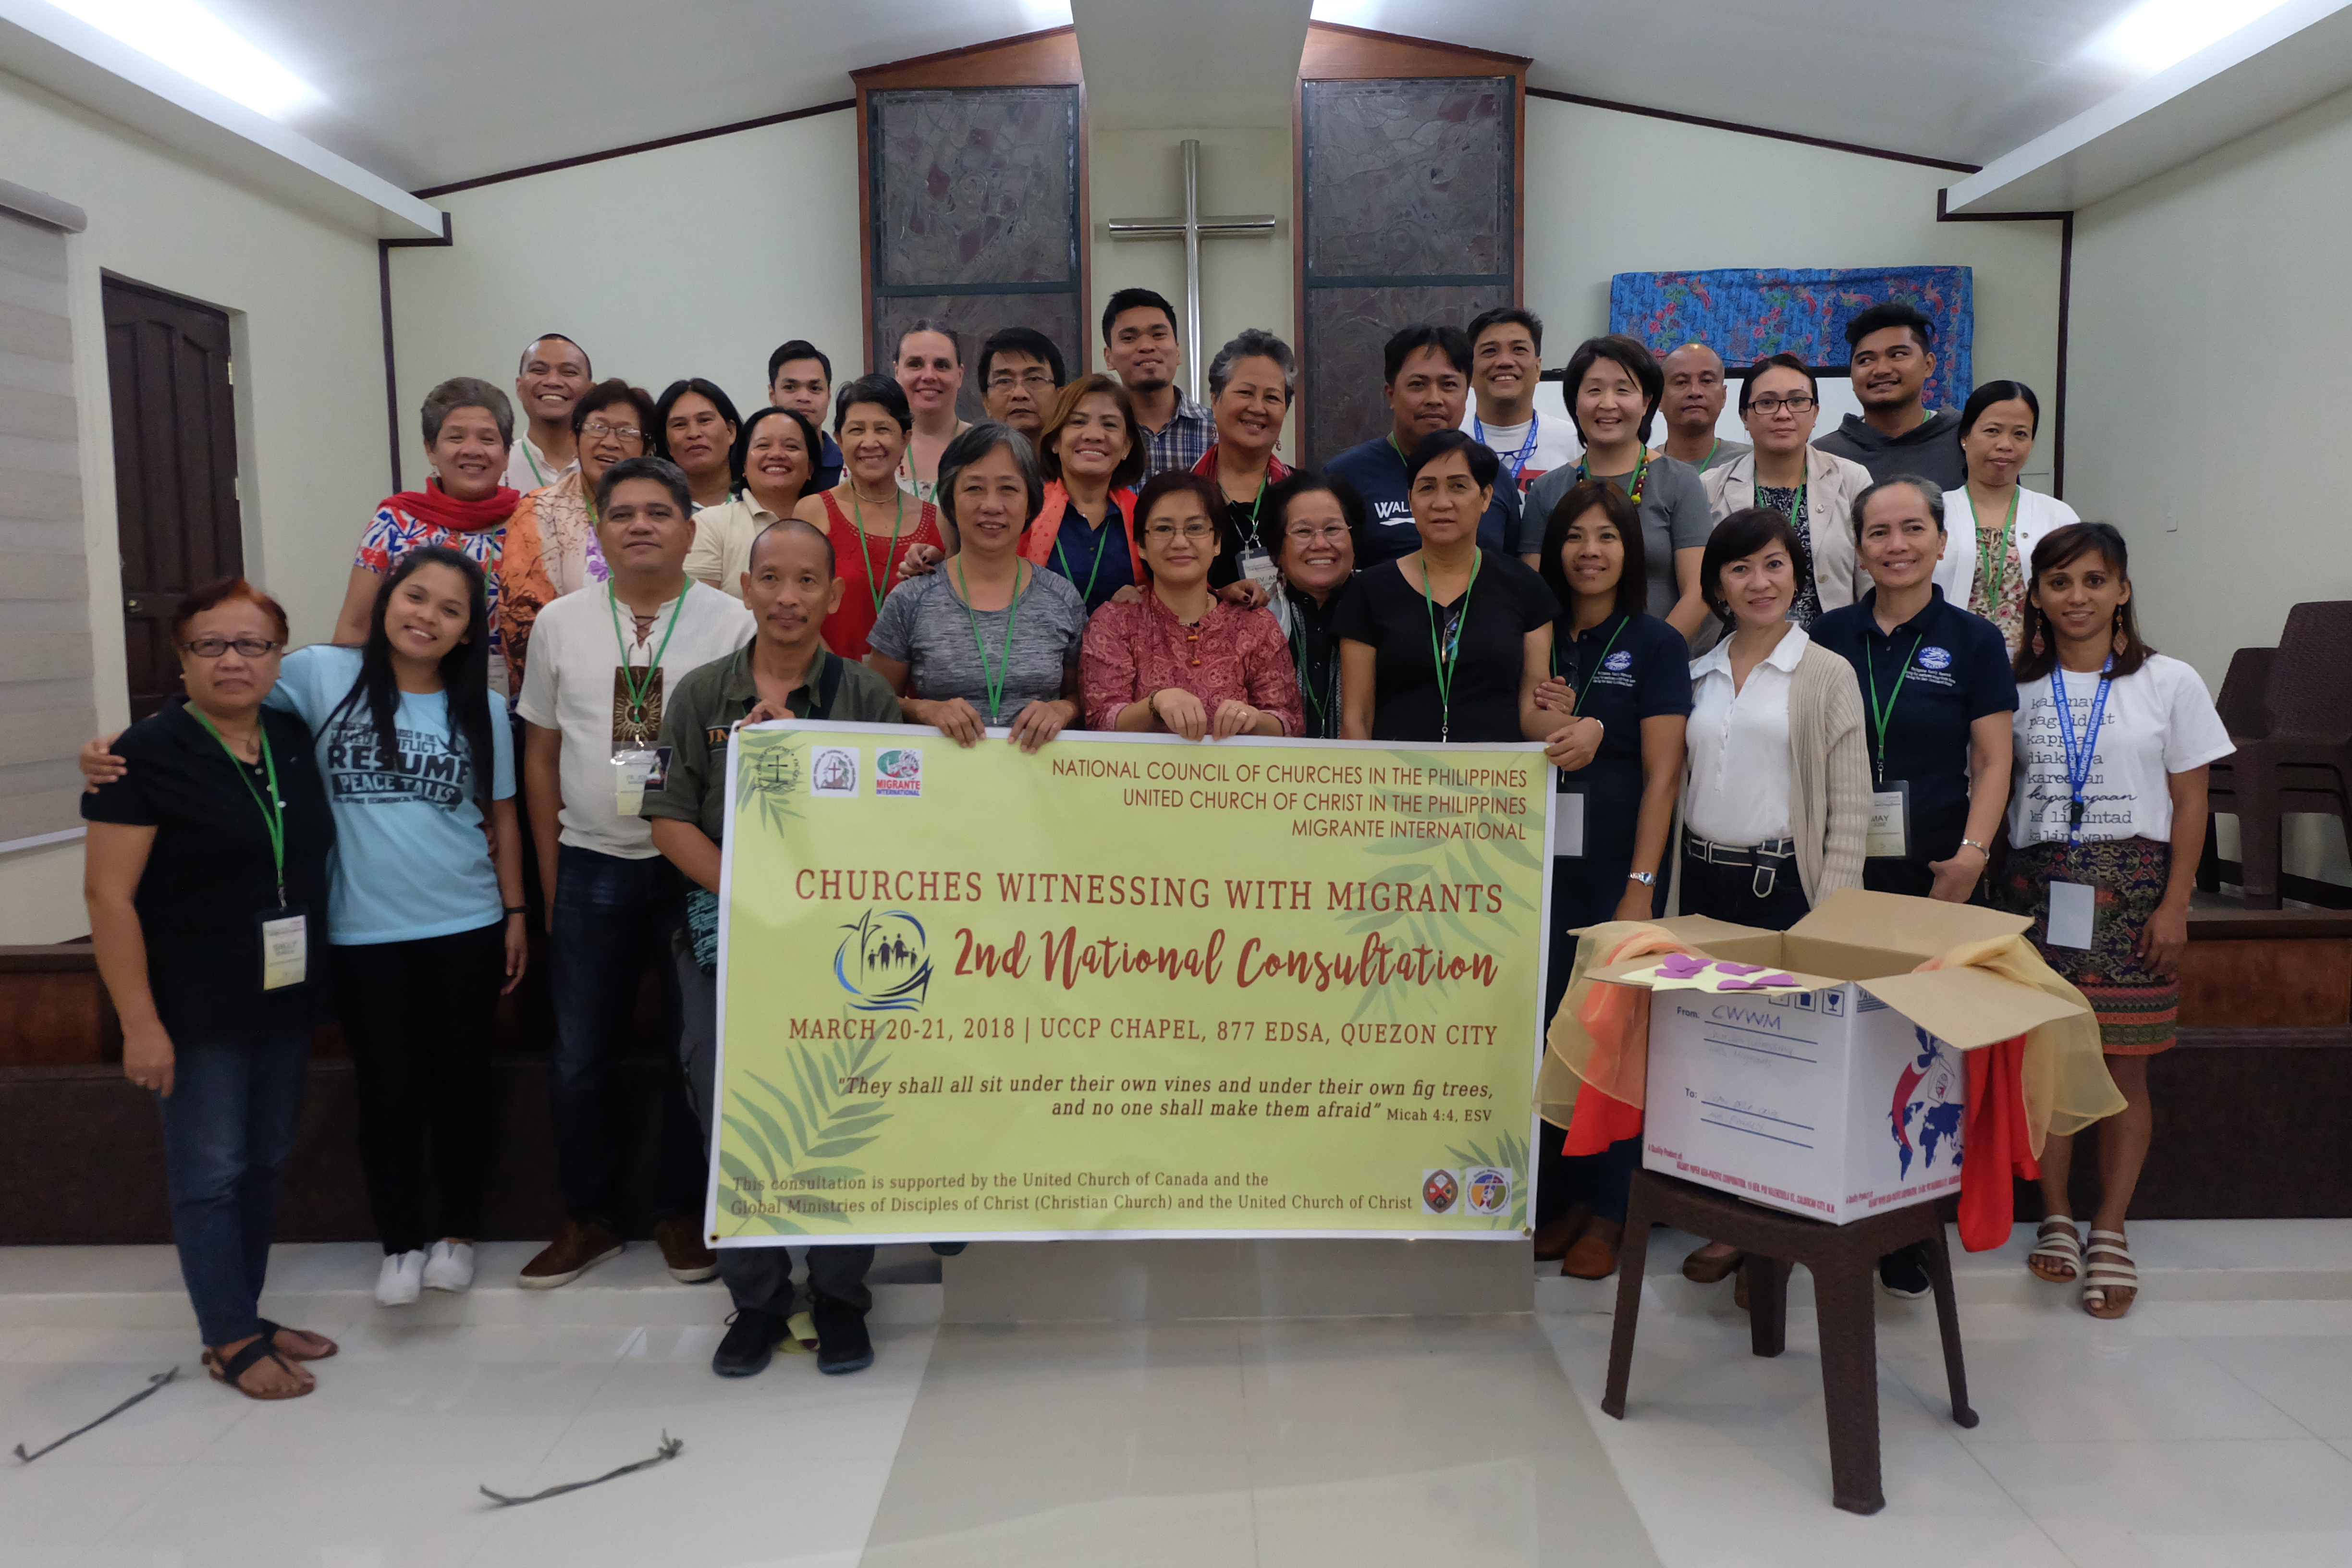 This past March, Pastor Sol was among the many who participated in the Philippine national consultation of Churches Witnessing With Migrants (CWWM).